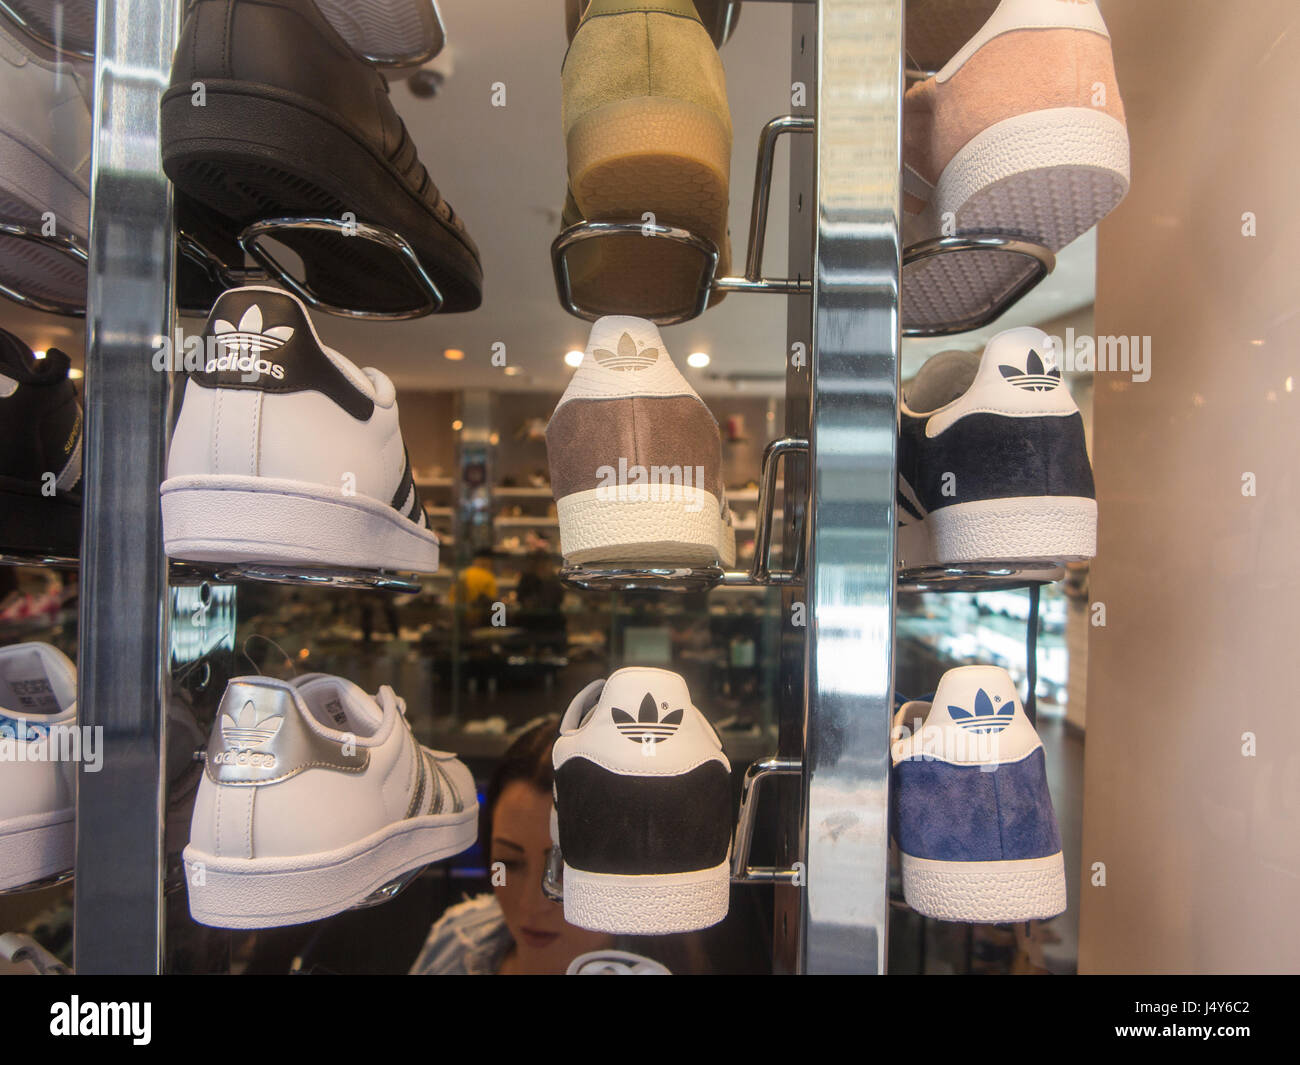 Branded Adidas and Nike trainers in a shoe shop in Soho, London Stock Photo  - Alamy